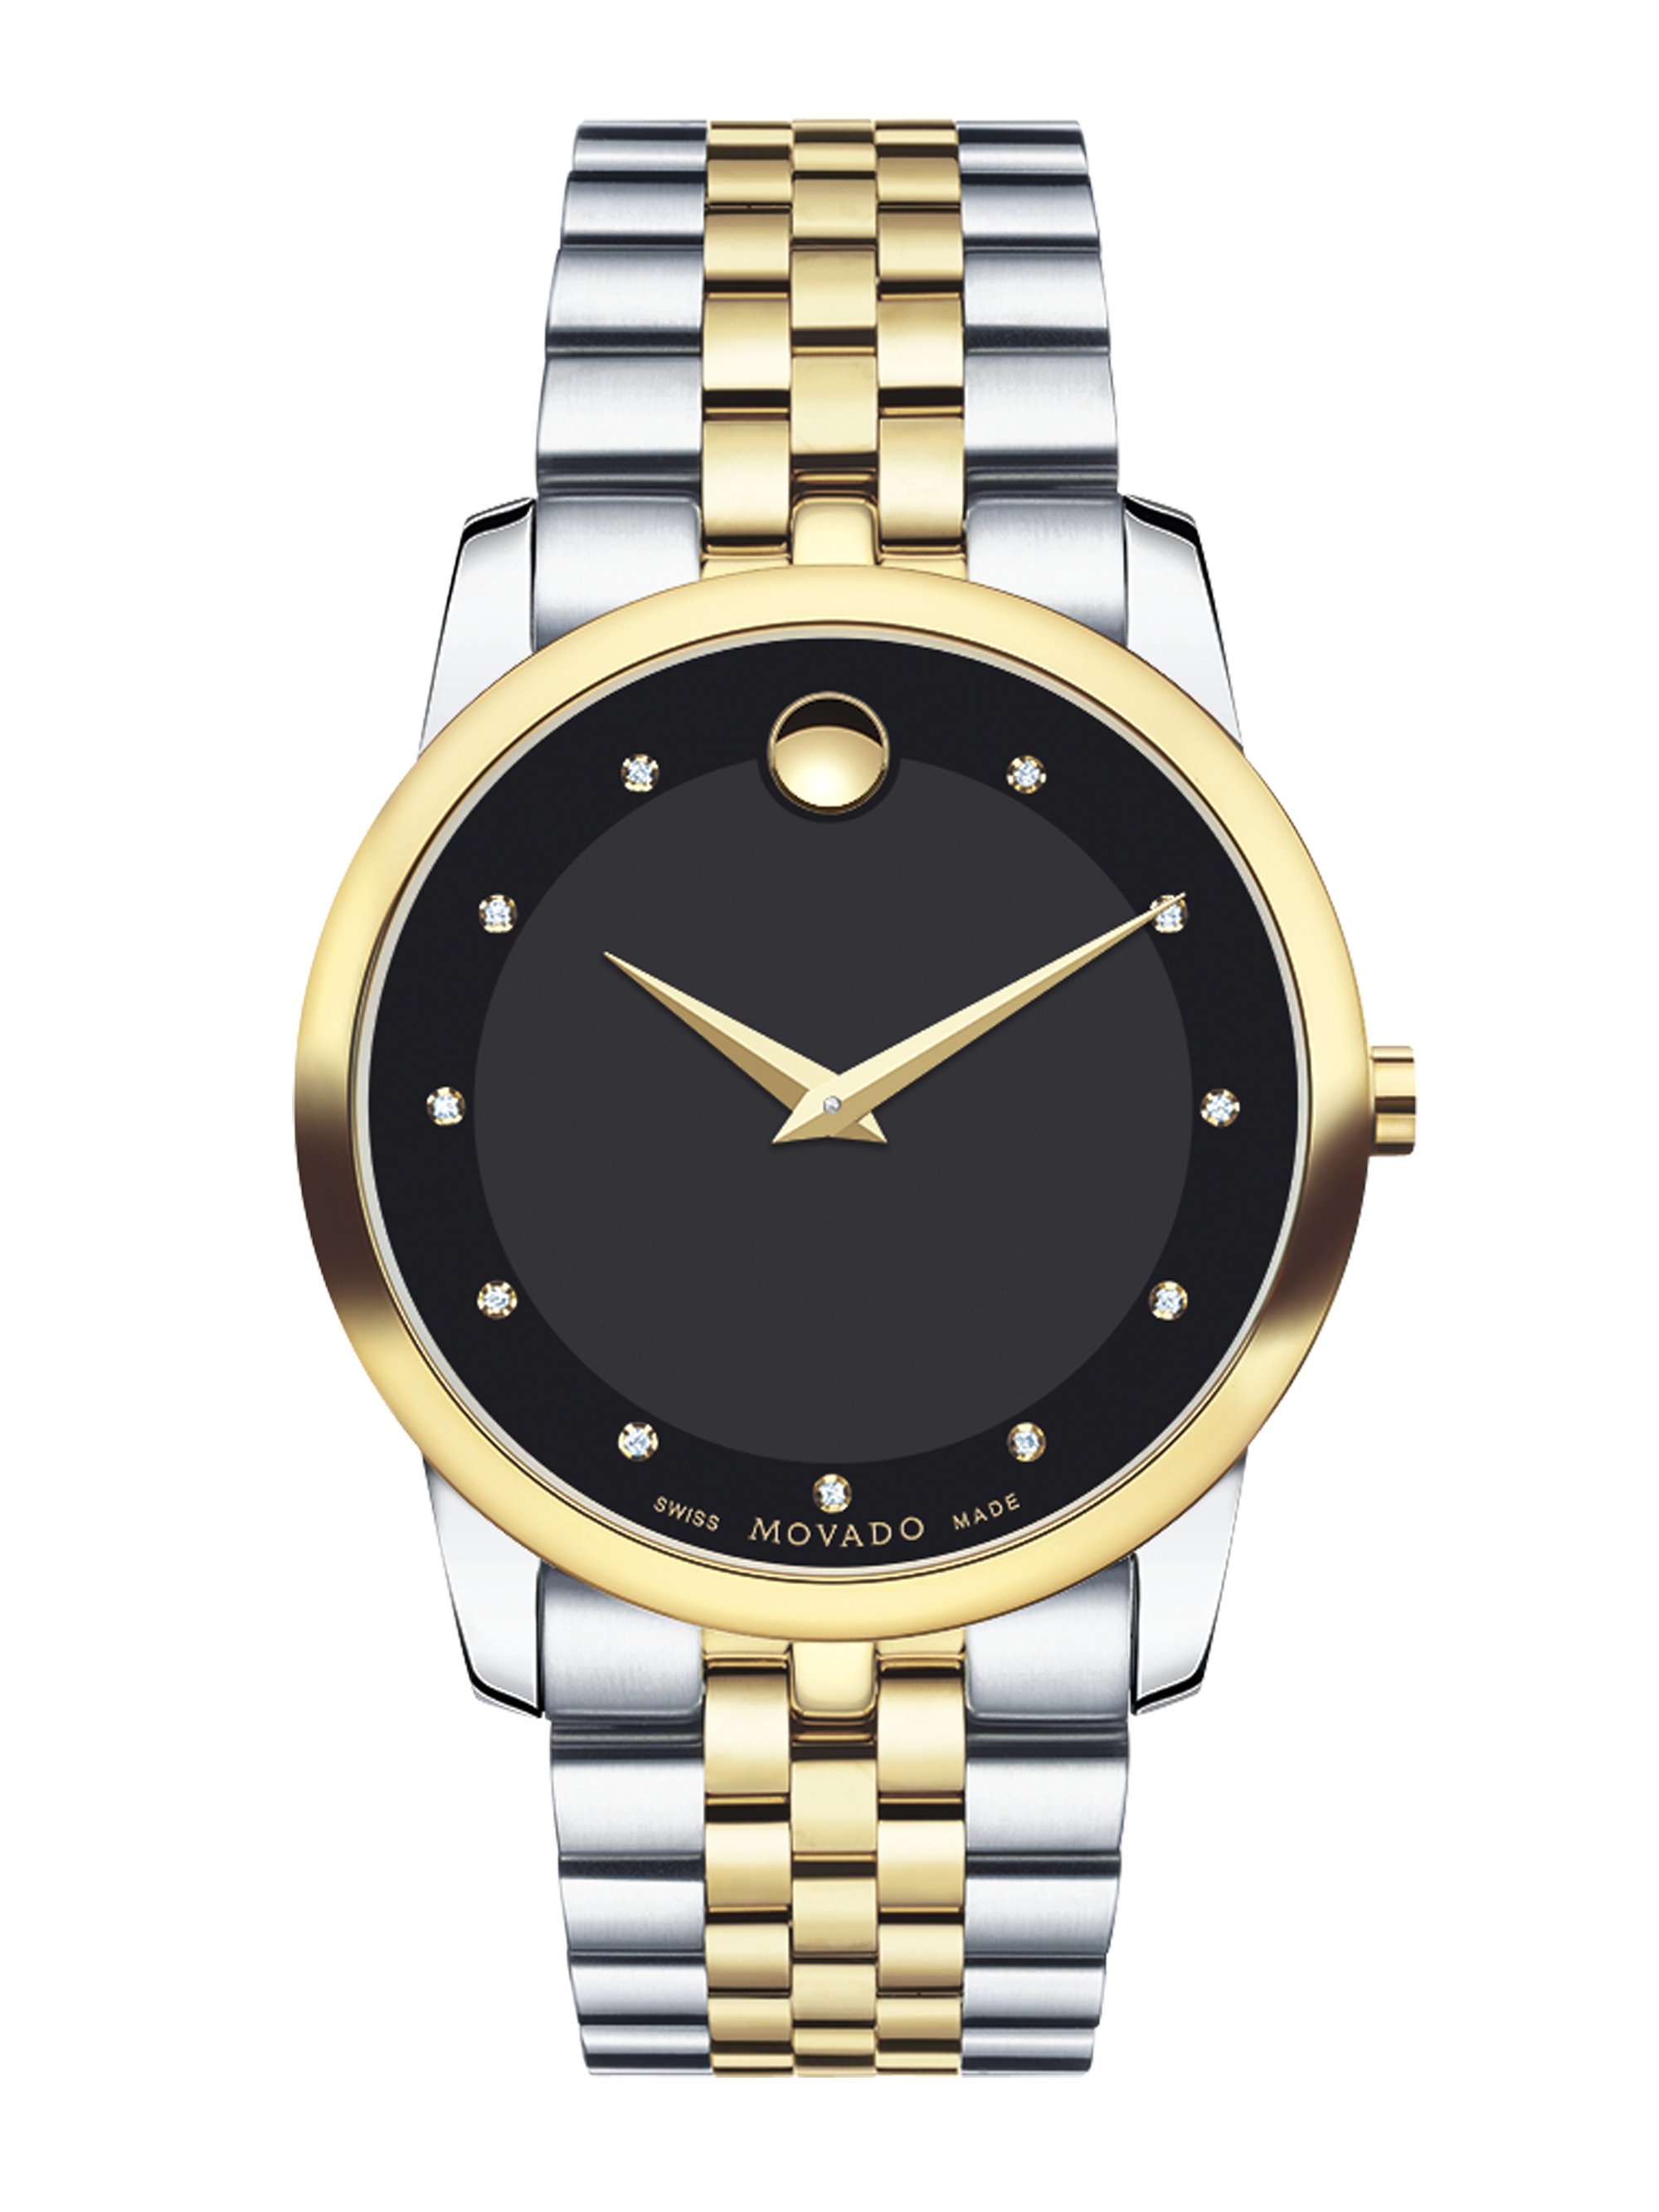 Movado Men's Museum Classic Stainless Steel Watch